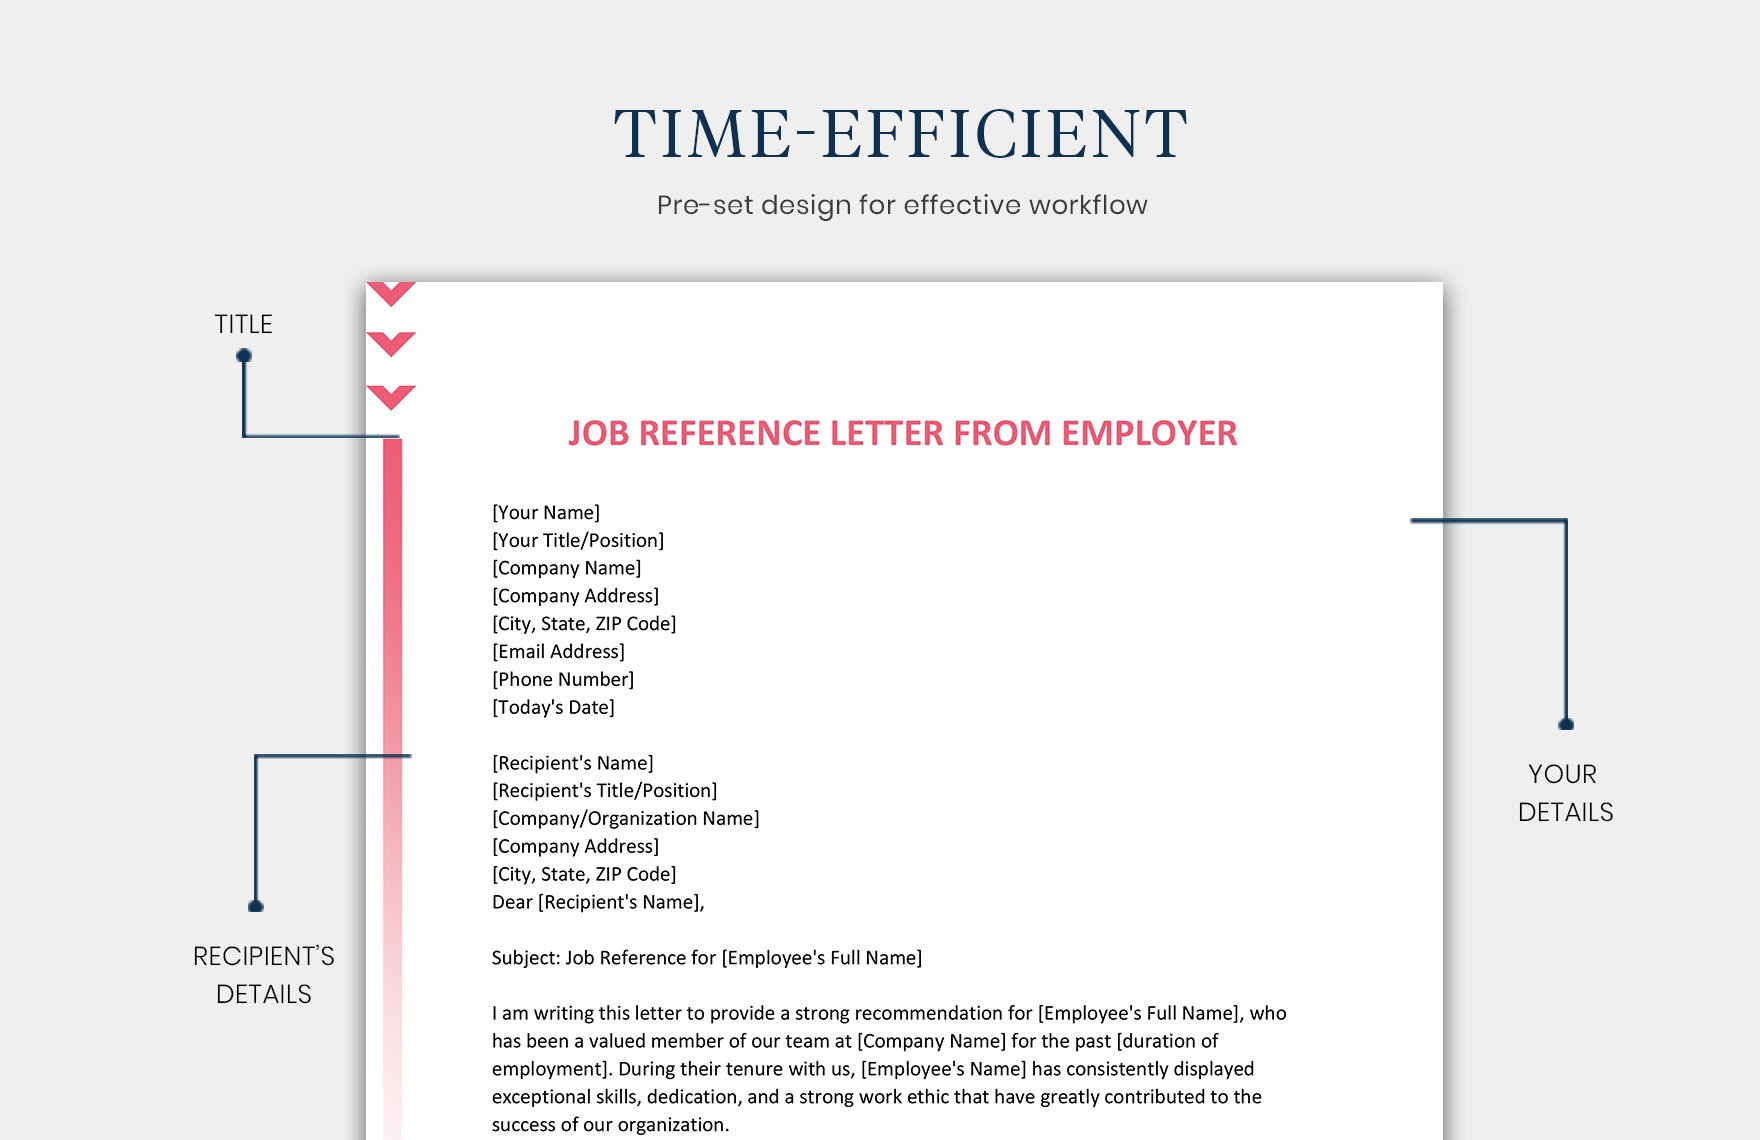 Job Reference Letter From Employer